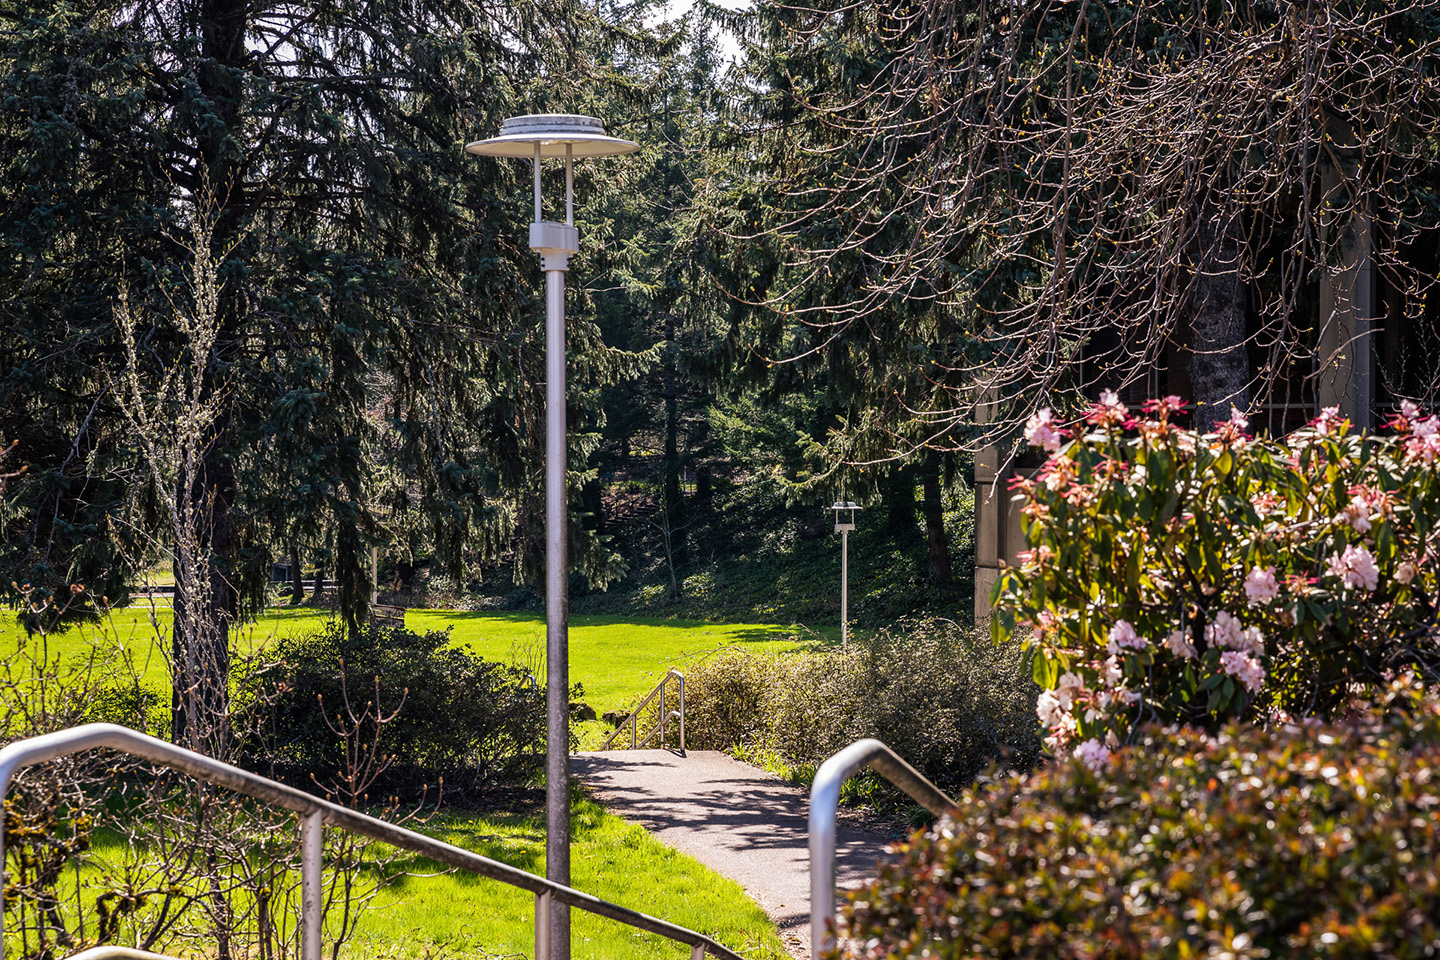 Trees, bushes, and light post on Gresham campus